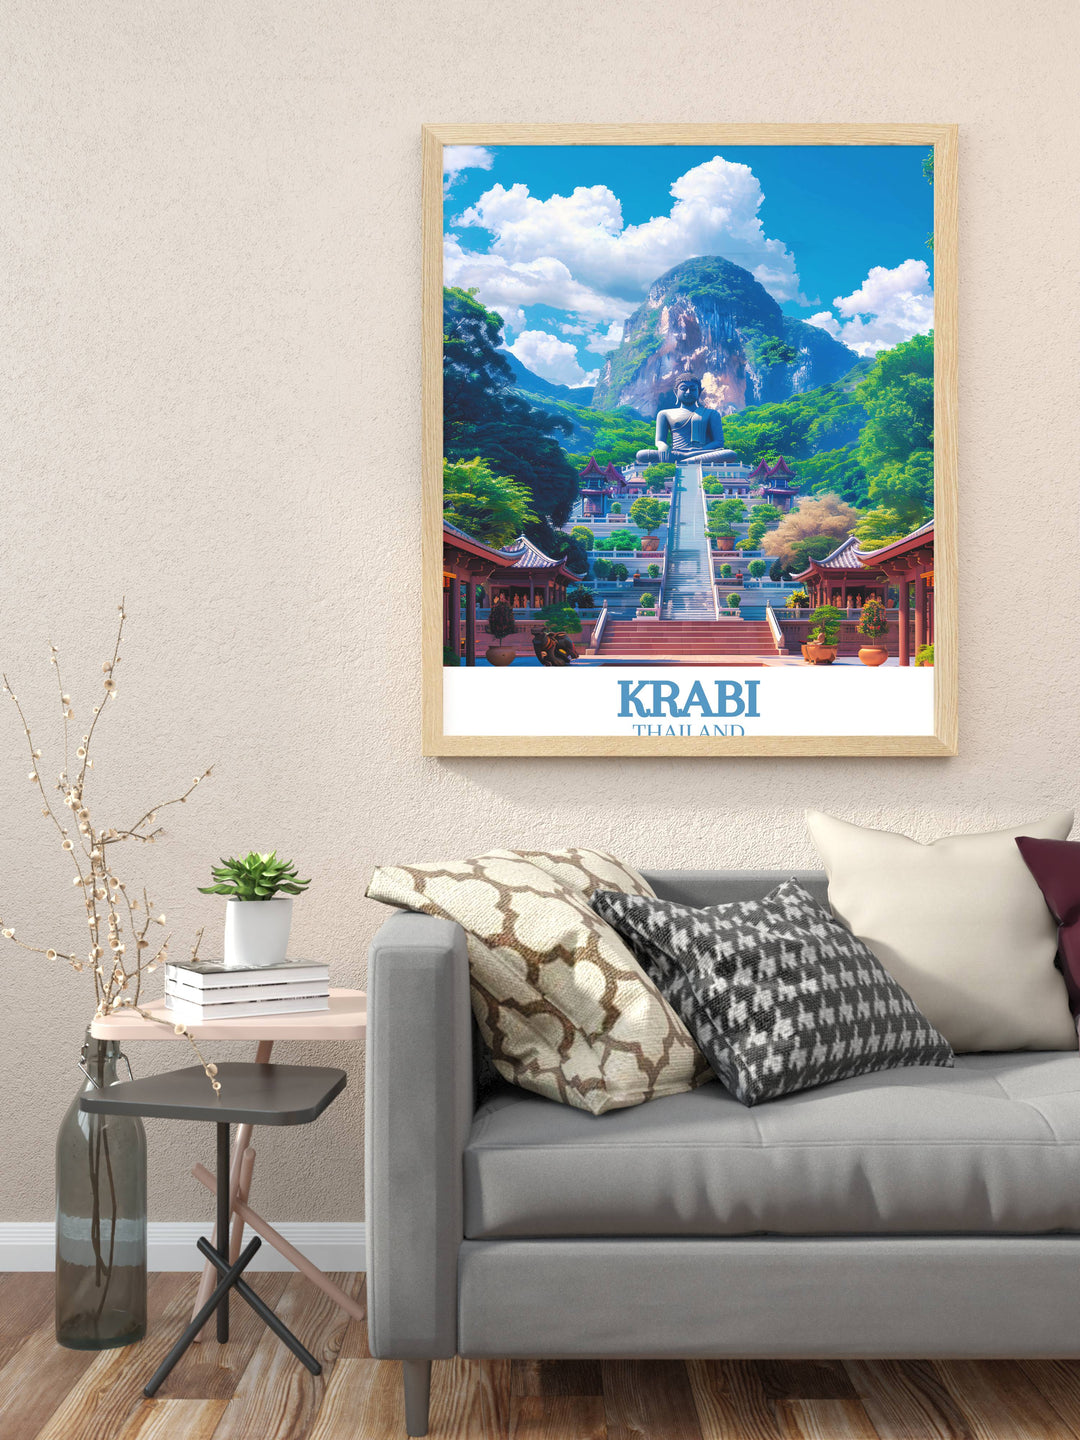 Transform your home decor with the vibrant colors and serene beauty of Krabi Island and Tiger Cave Temple captured in this beautiful wall art print ideal for adding a touch of tropical paradise and making a memorable travel gift.